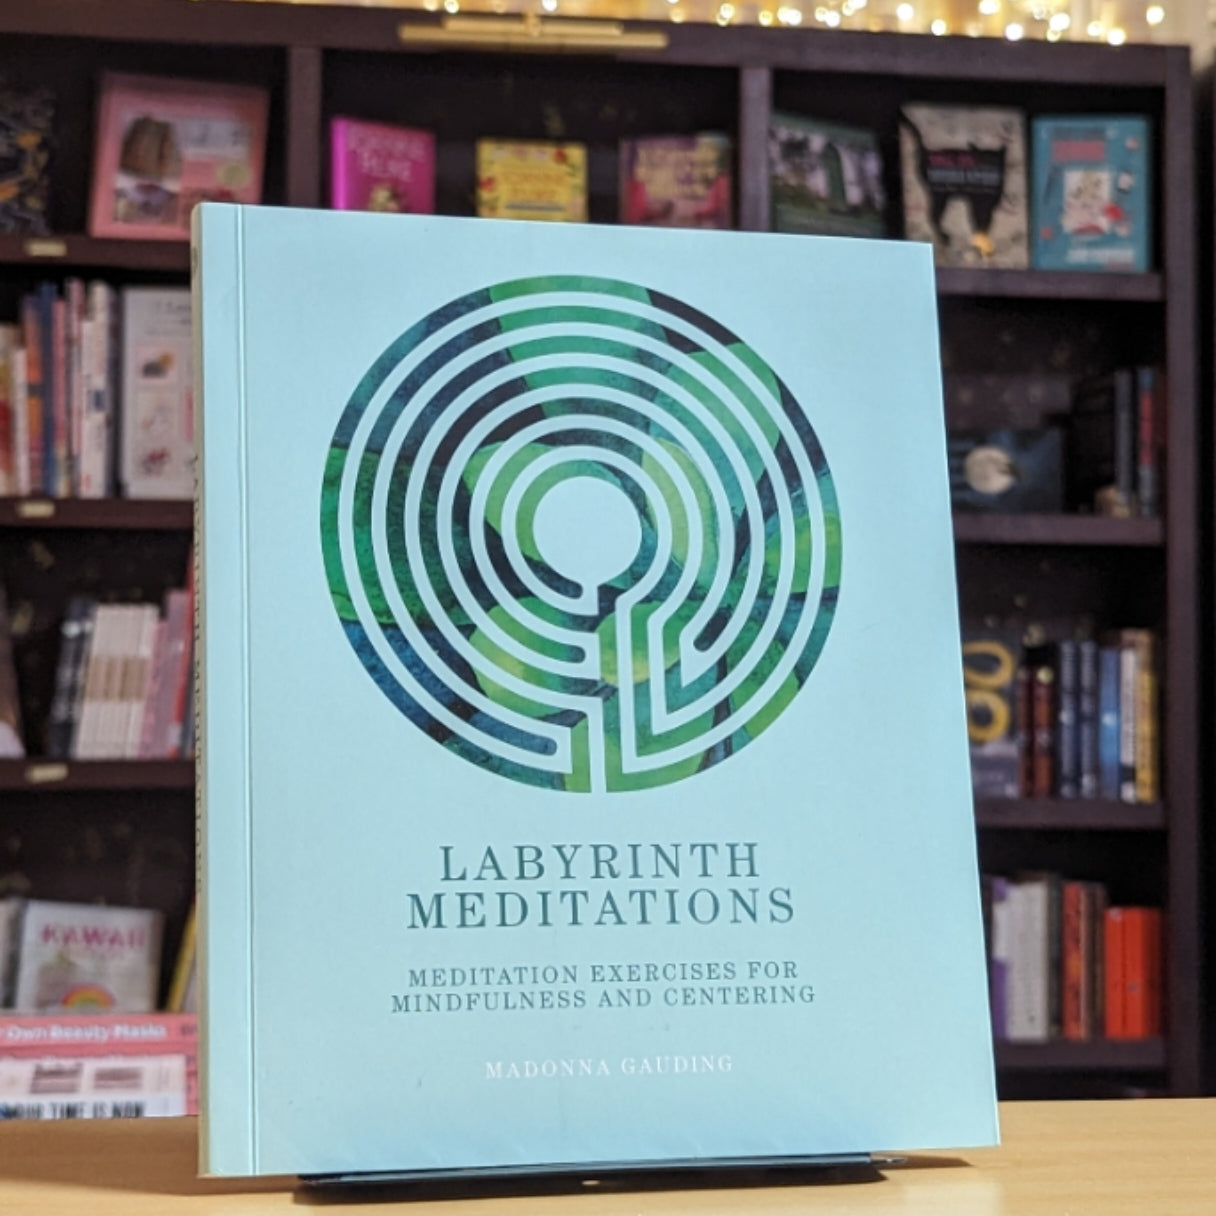 Labyrinth Meditations: Exercises for Mindfulness and Centering